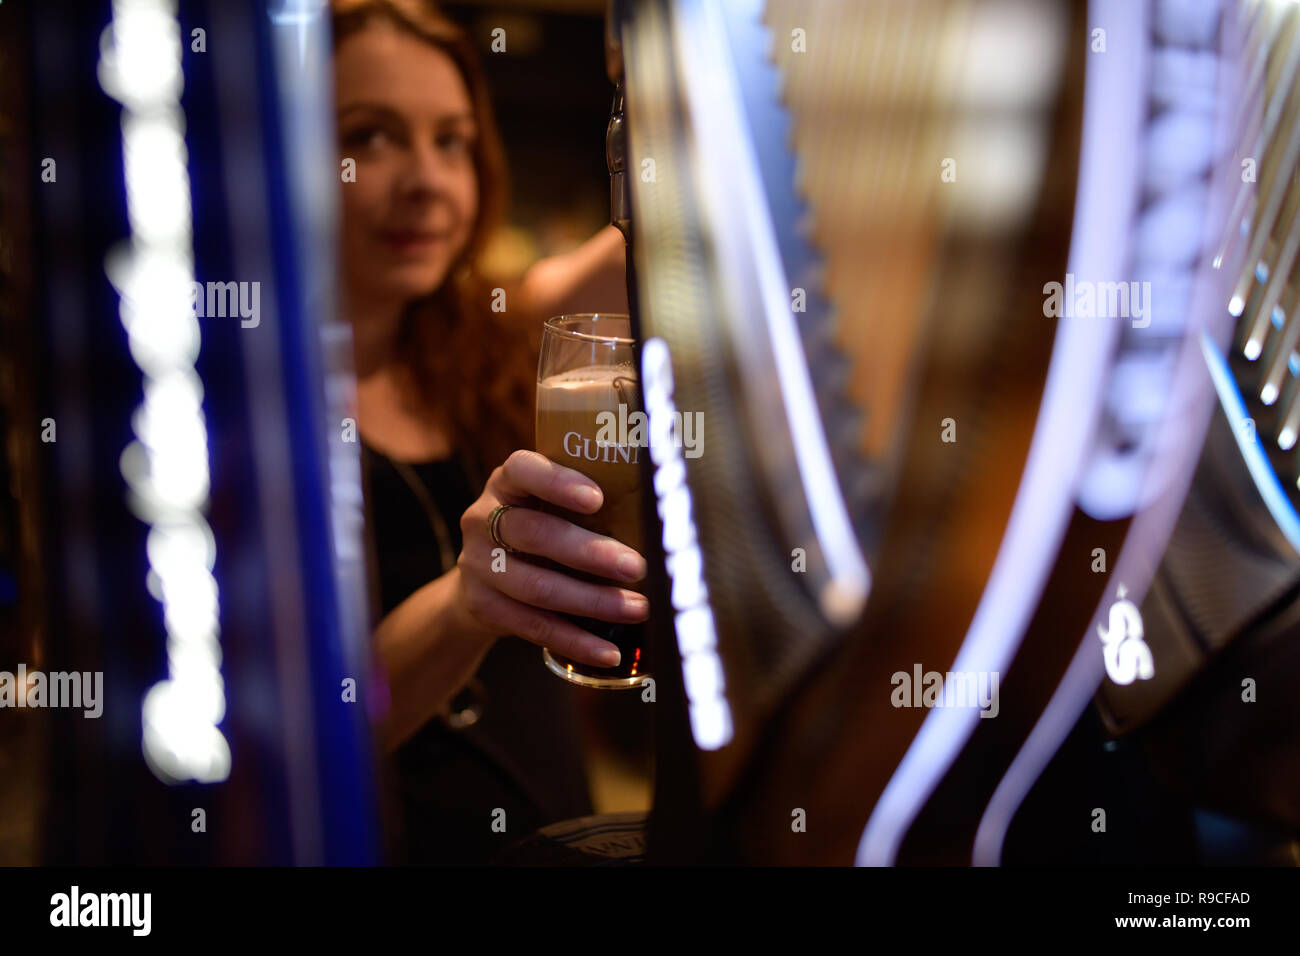 woman serving drinks in a bar Stock Photo